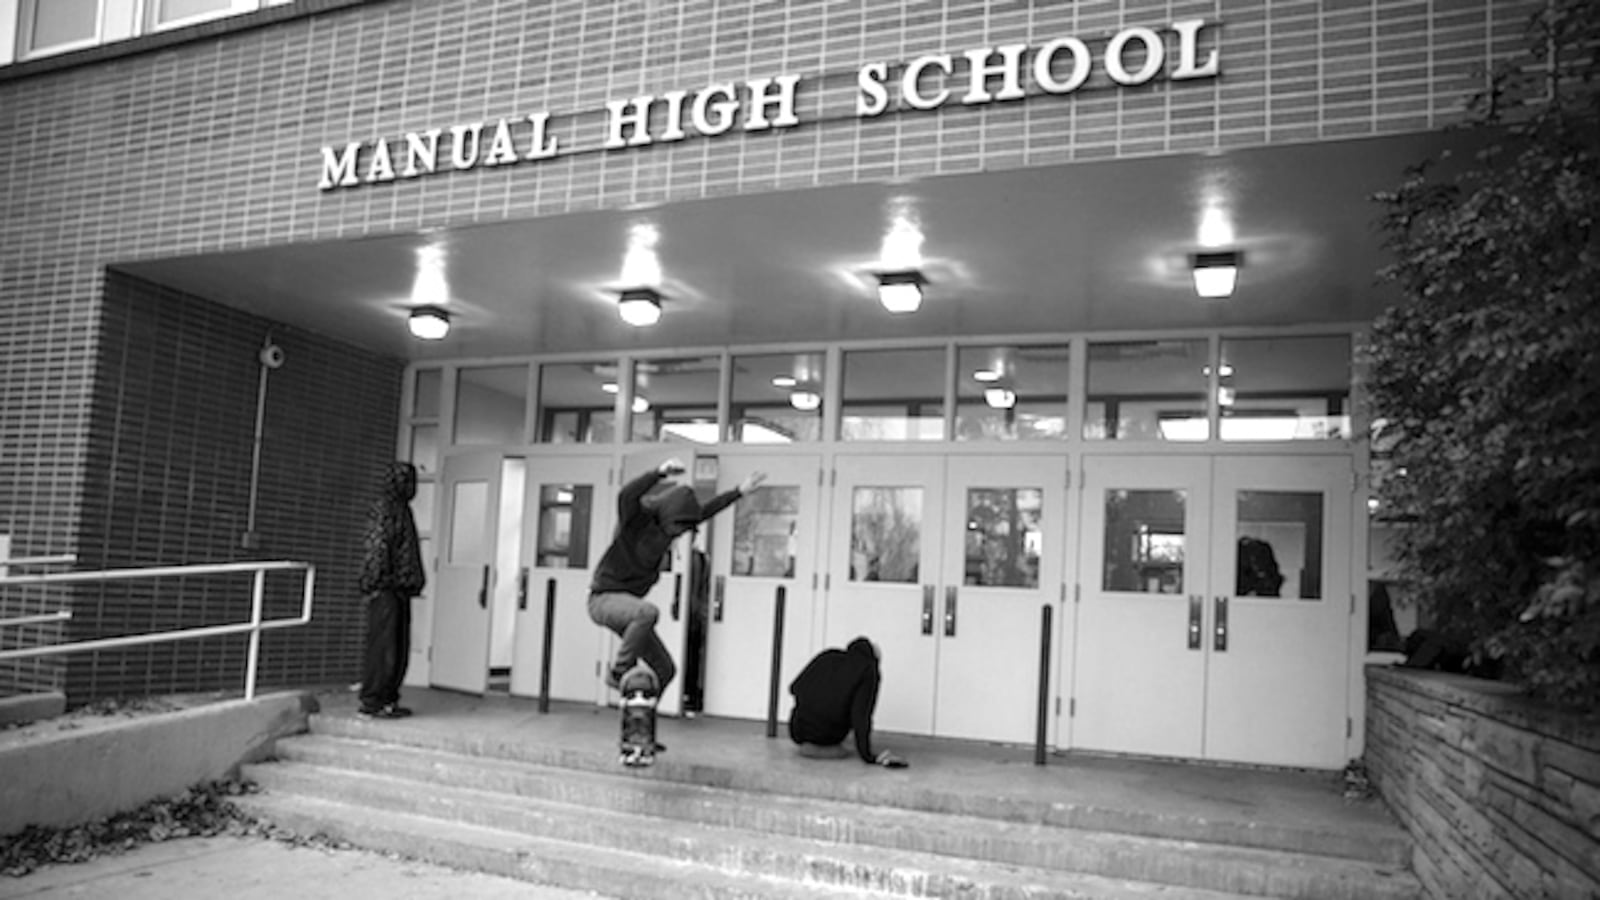 A Manual student skateboards across an entrance in December. Students are aware of how far behind they are, but constant 'nagging' has left many students dis-interested in learning.